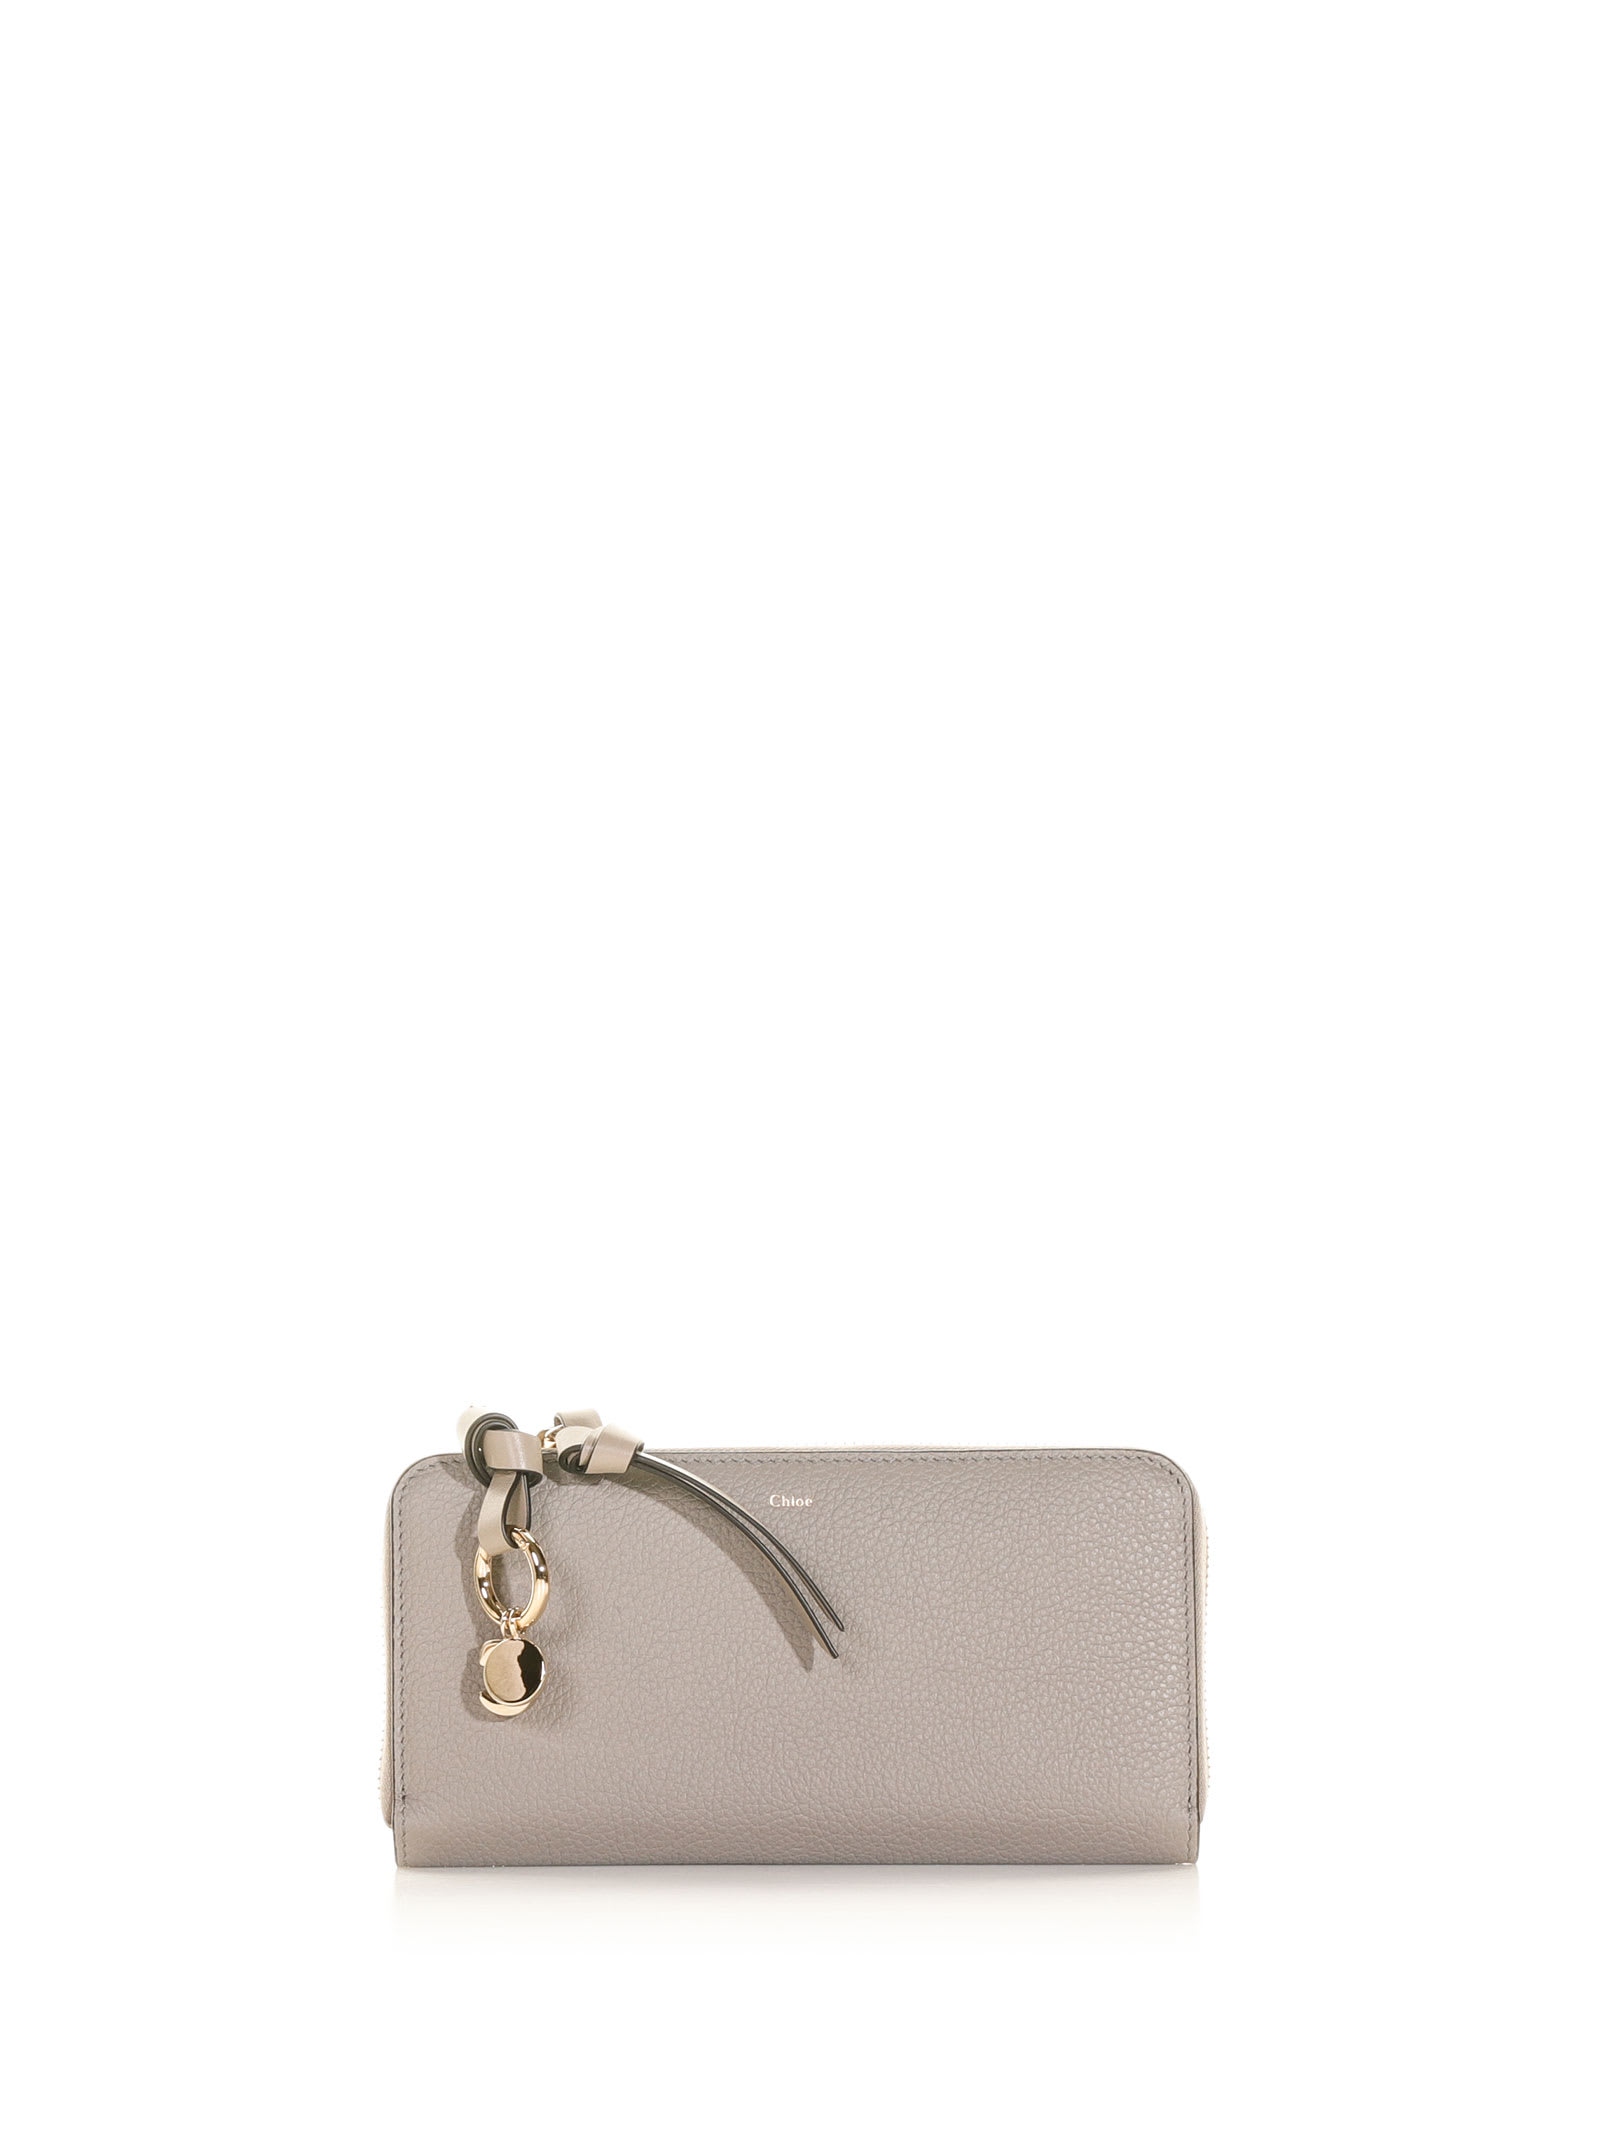 Chloé Full Zip Leather Wallet In Cashmere Grey